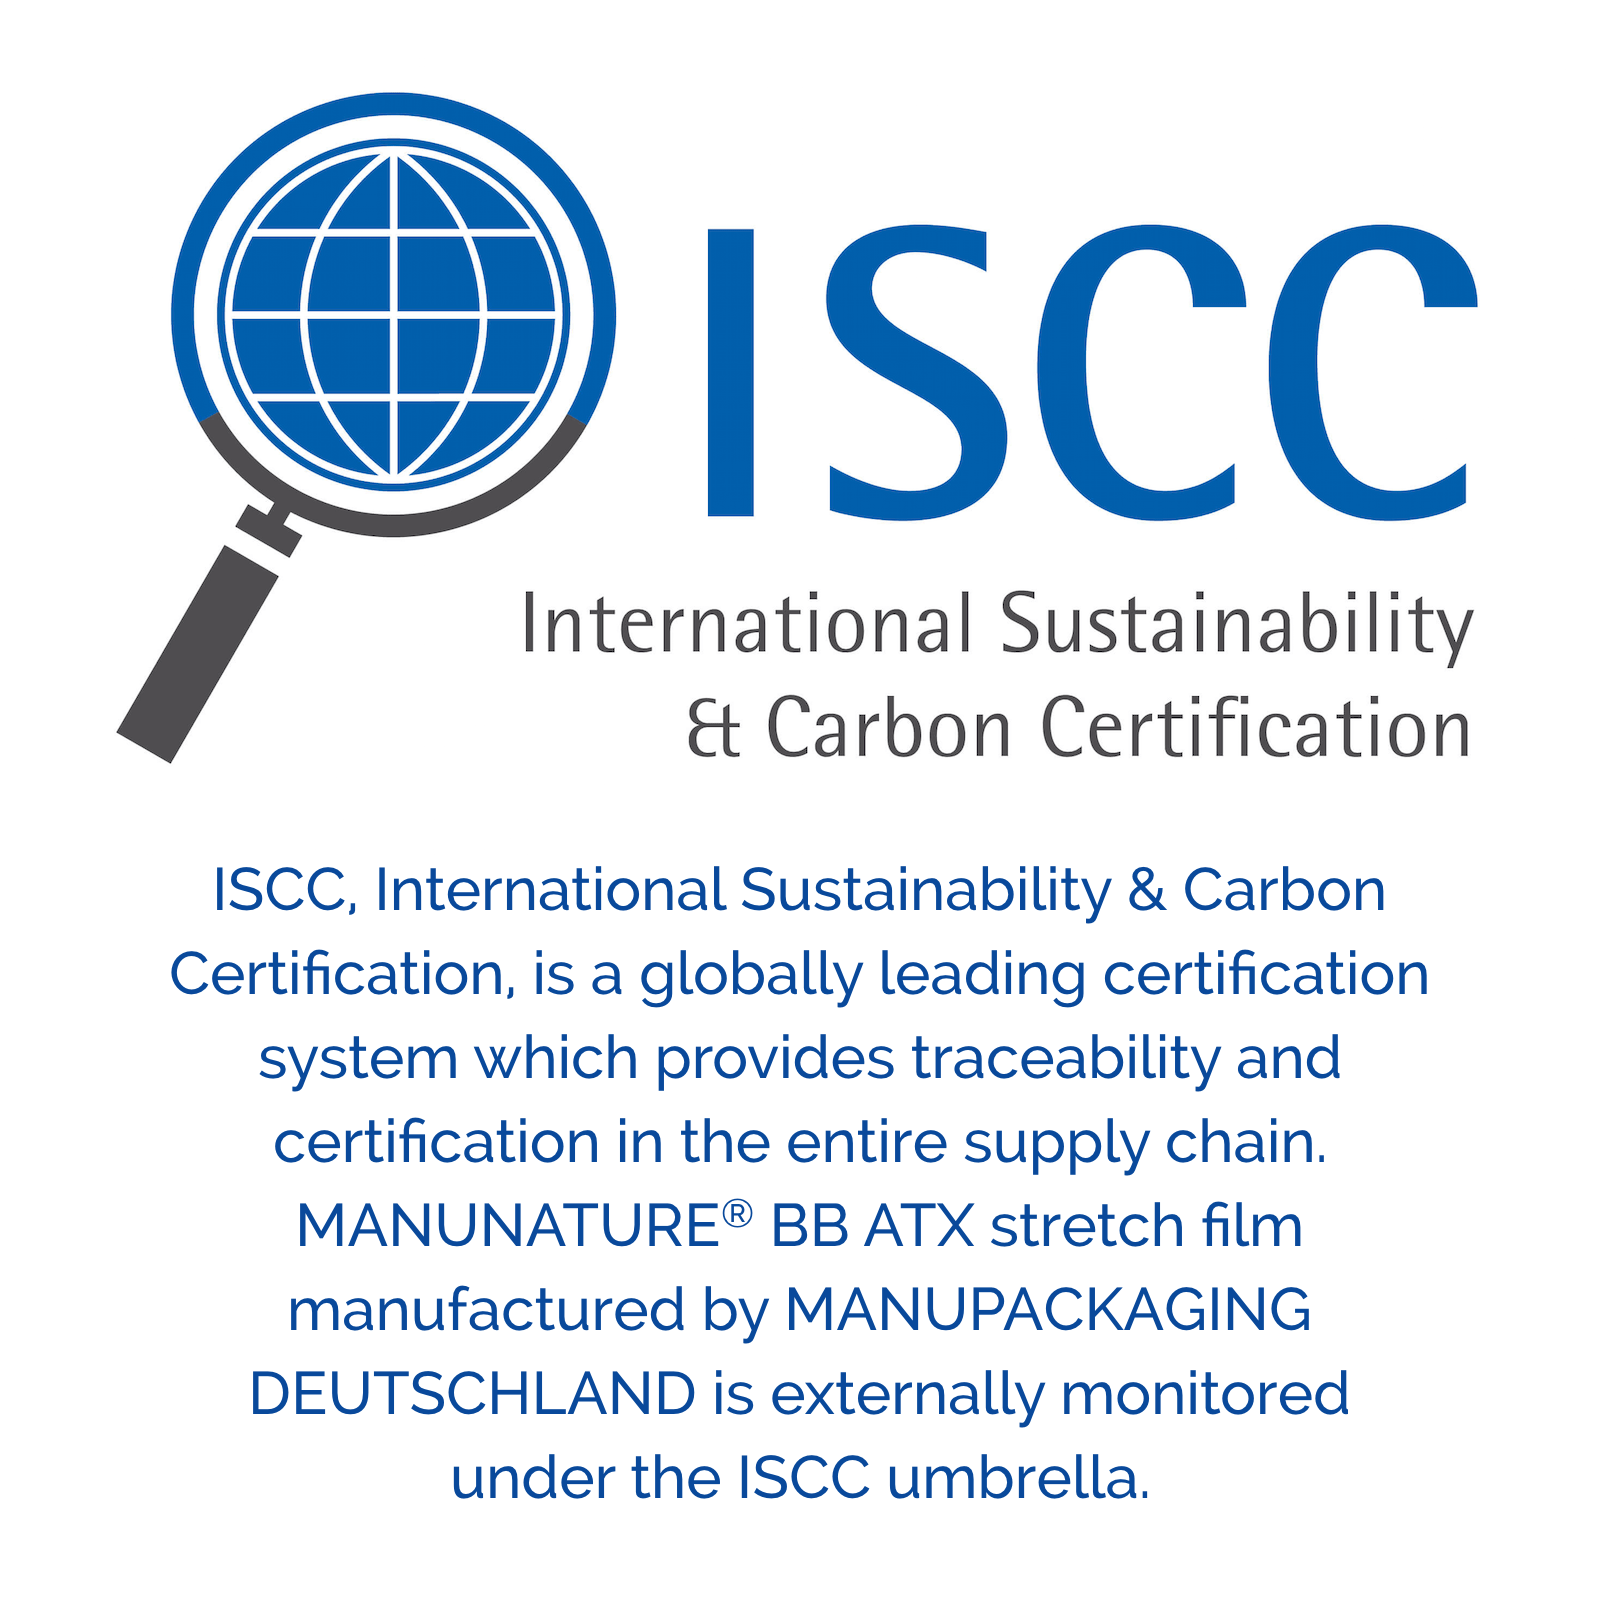 ISCC - International Sustainability & Carbon Certification